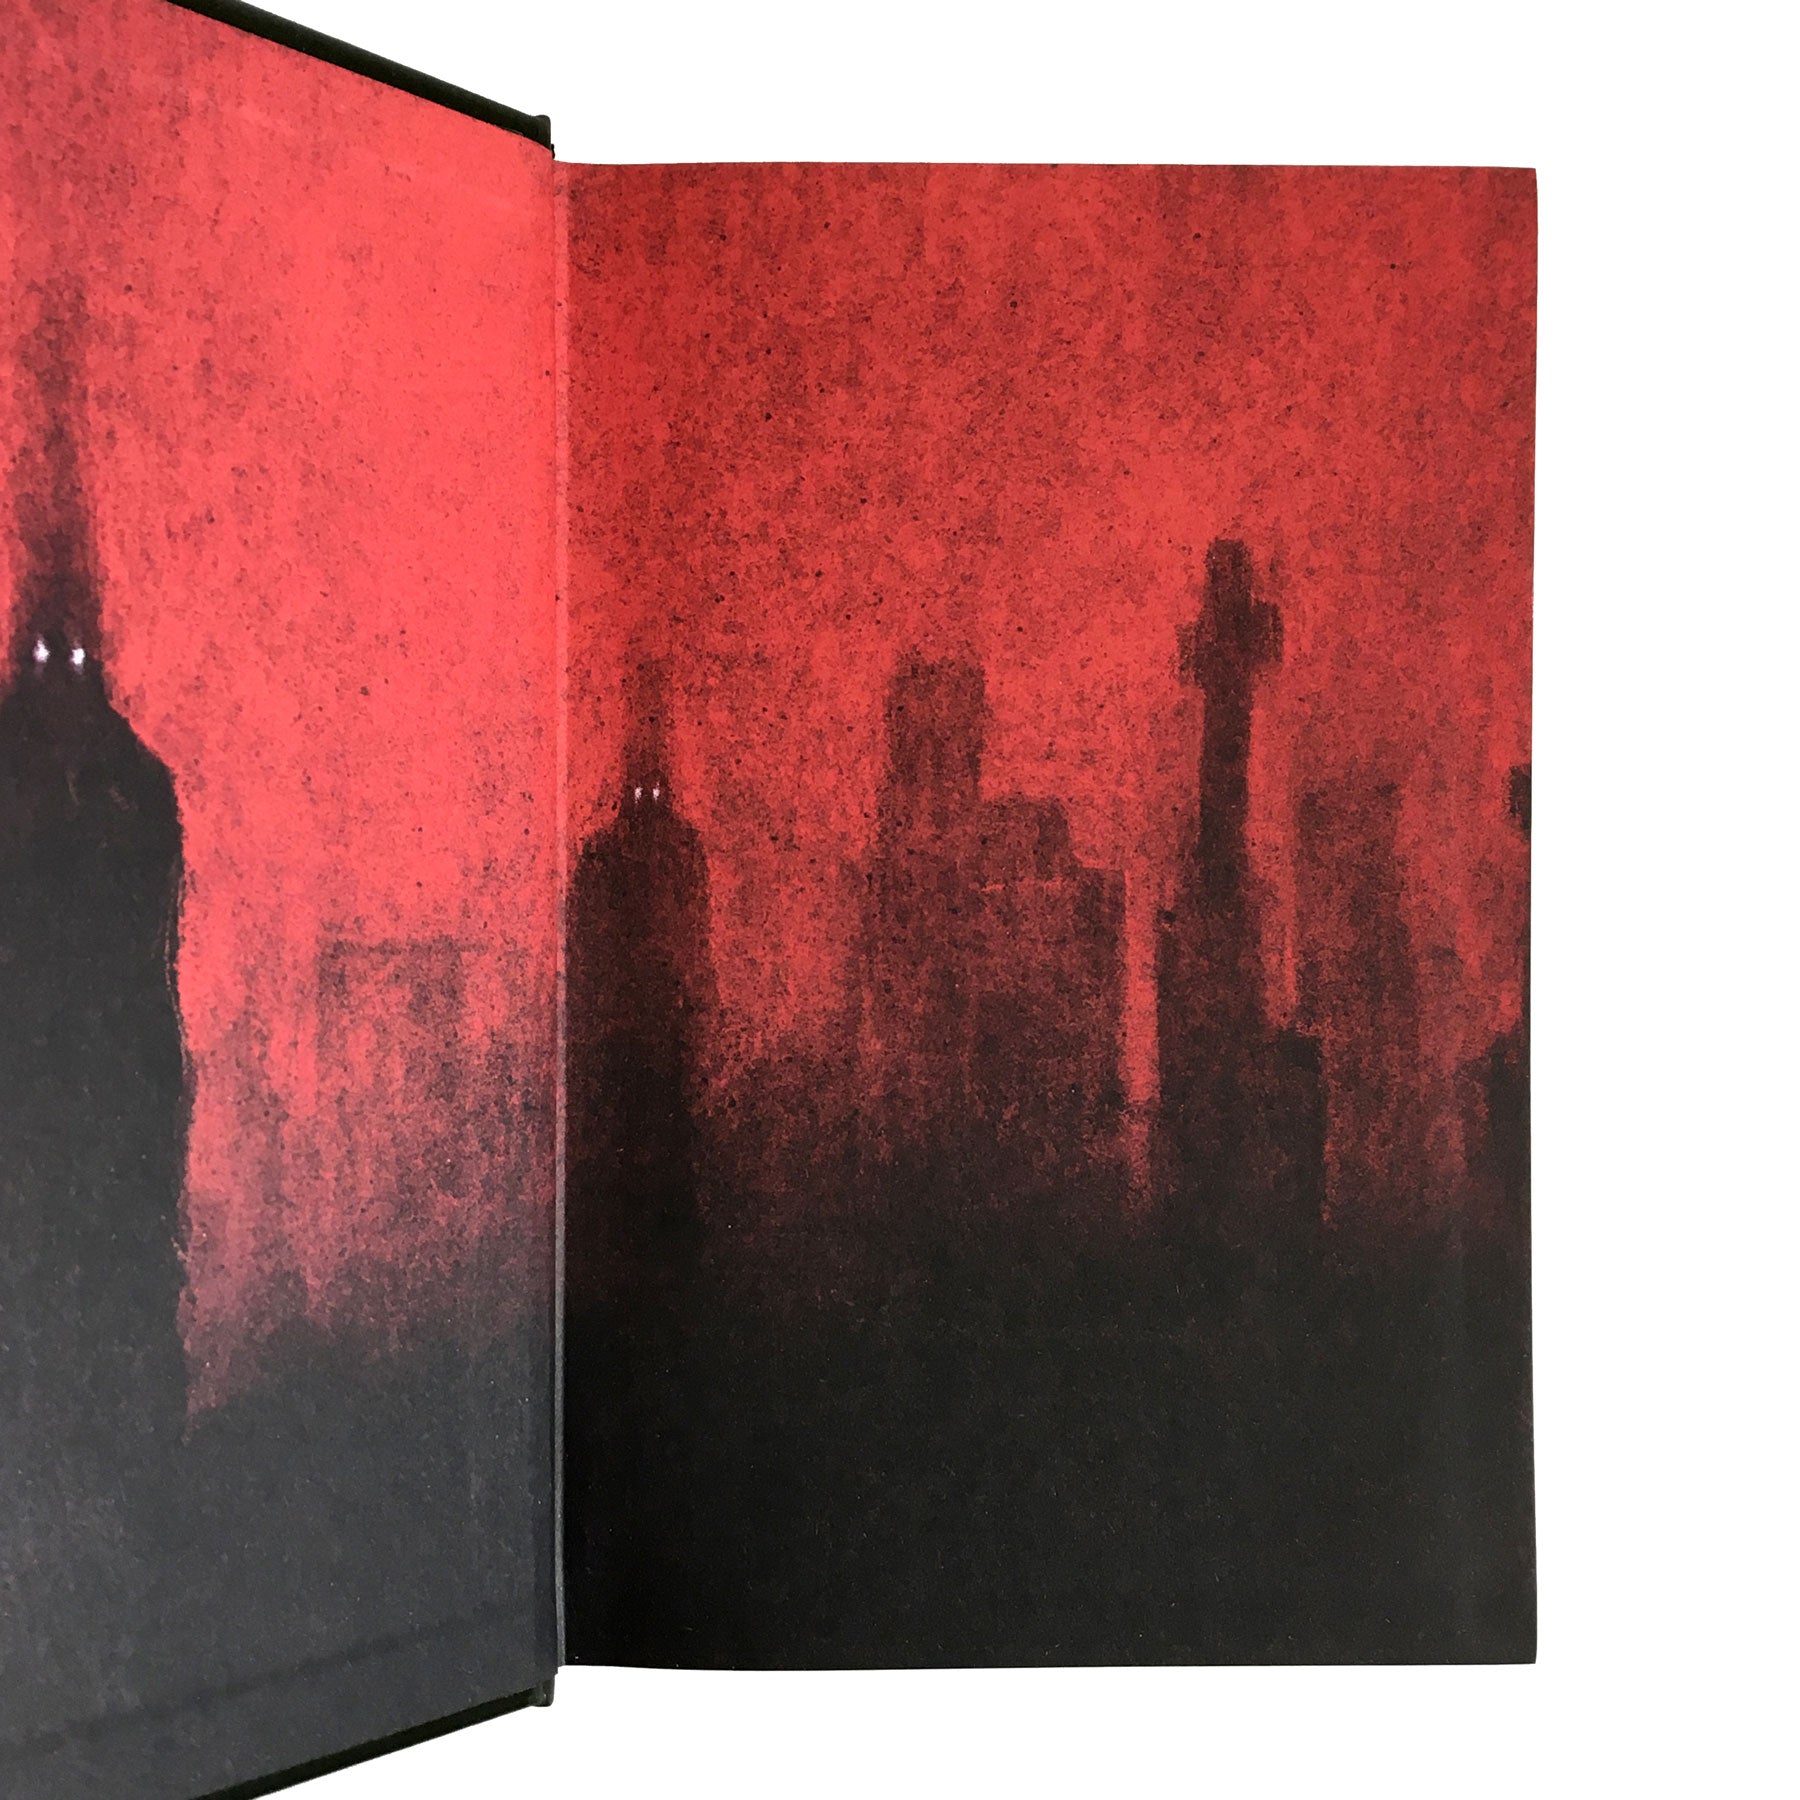 Classic Tales of Horror Leather Bound Edition